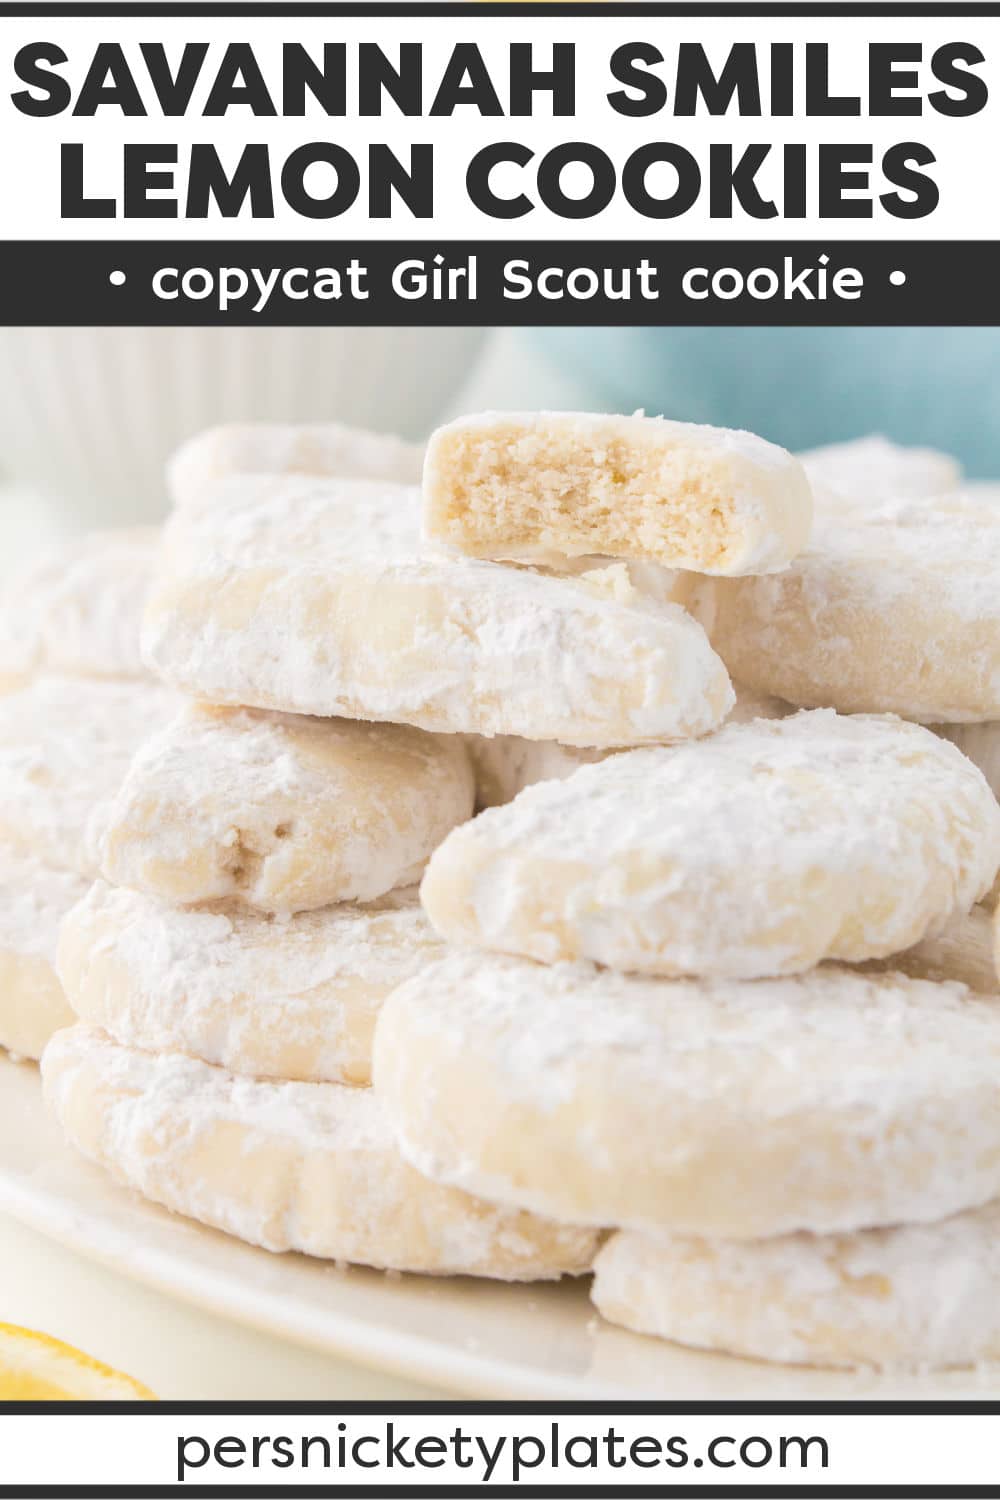 These copycat Savannah smiles are my take on the original Girl Scout cookie recipe made with simple ingredients and ready in under 30 minutes! These crisp, buttery, sweet, and lemon-infused cookies are coated in powdered sugar, making them as irresistible as you'd imagine. One bite and you'll see why these are such a hit! | www.persnicketyplates.com